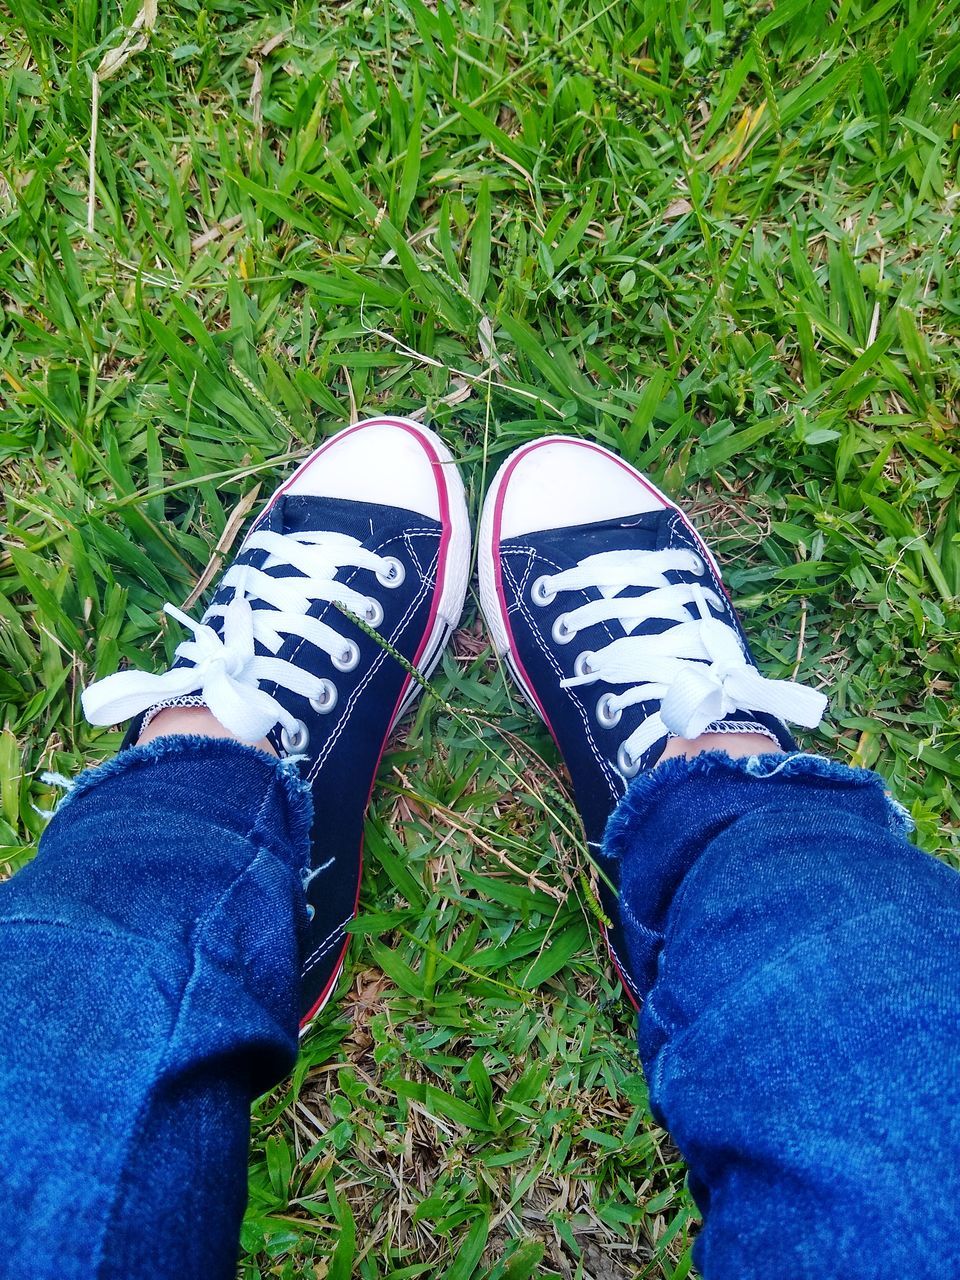 LOW SECTION OF PERSON WEARING SHOES ON GRASS